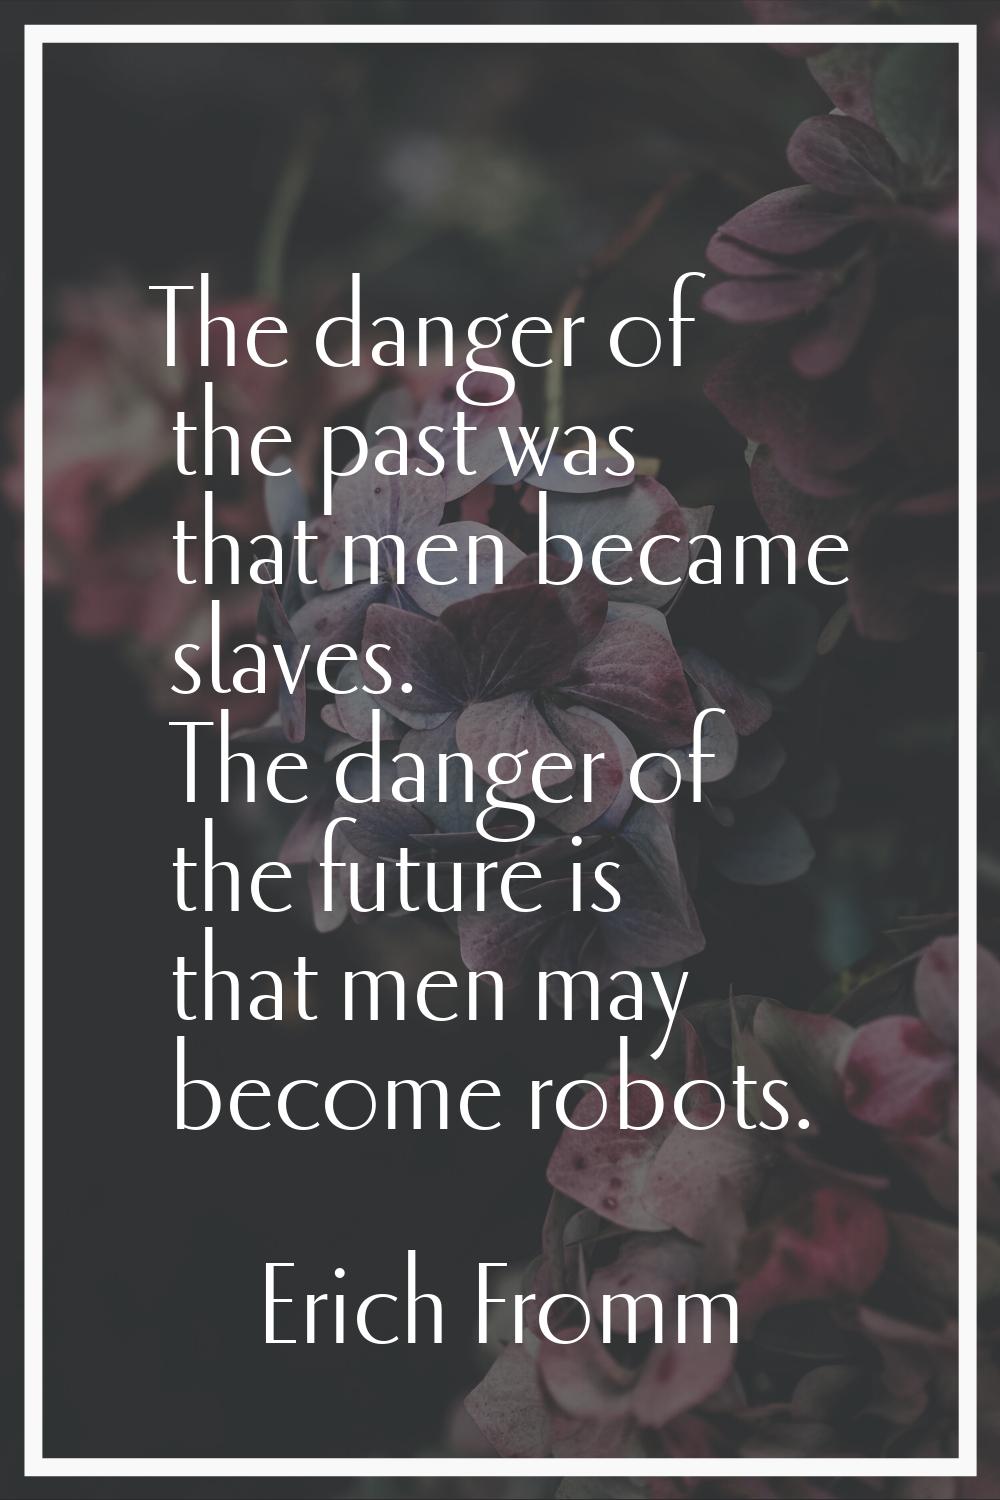 The danger of the past was that men became slaves. The danger of the future is that men may become 